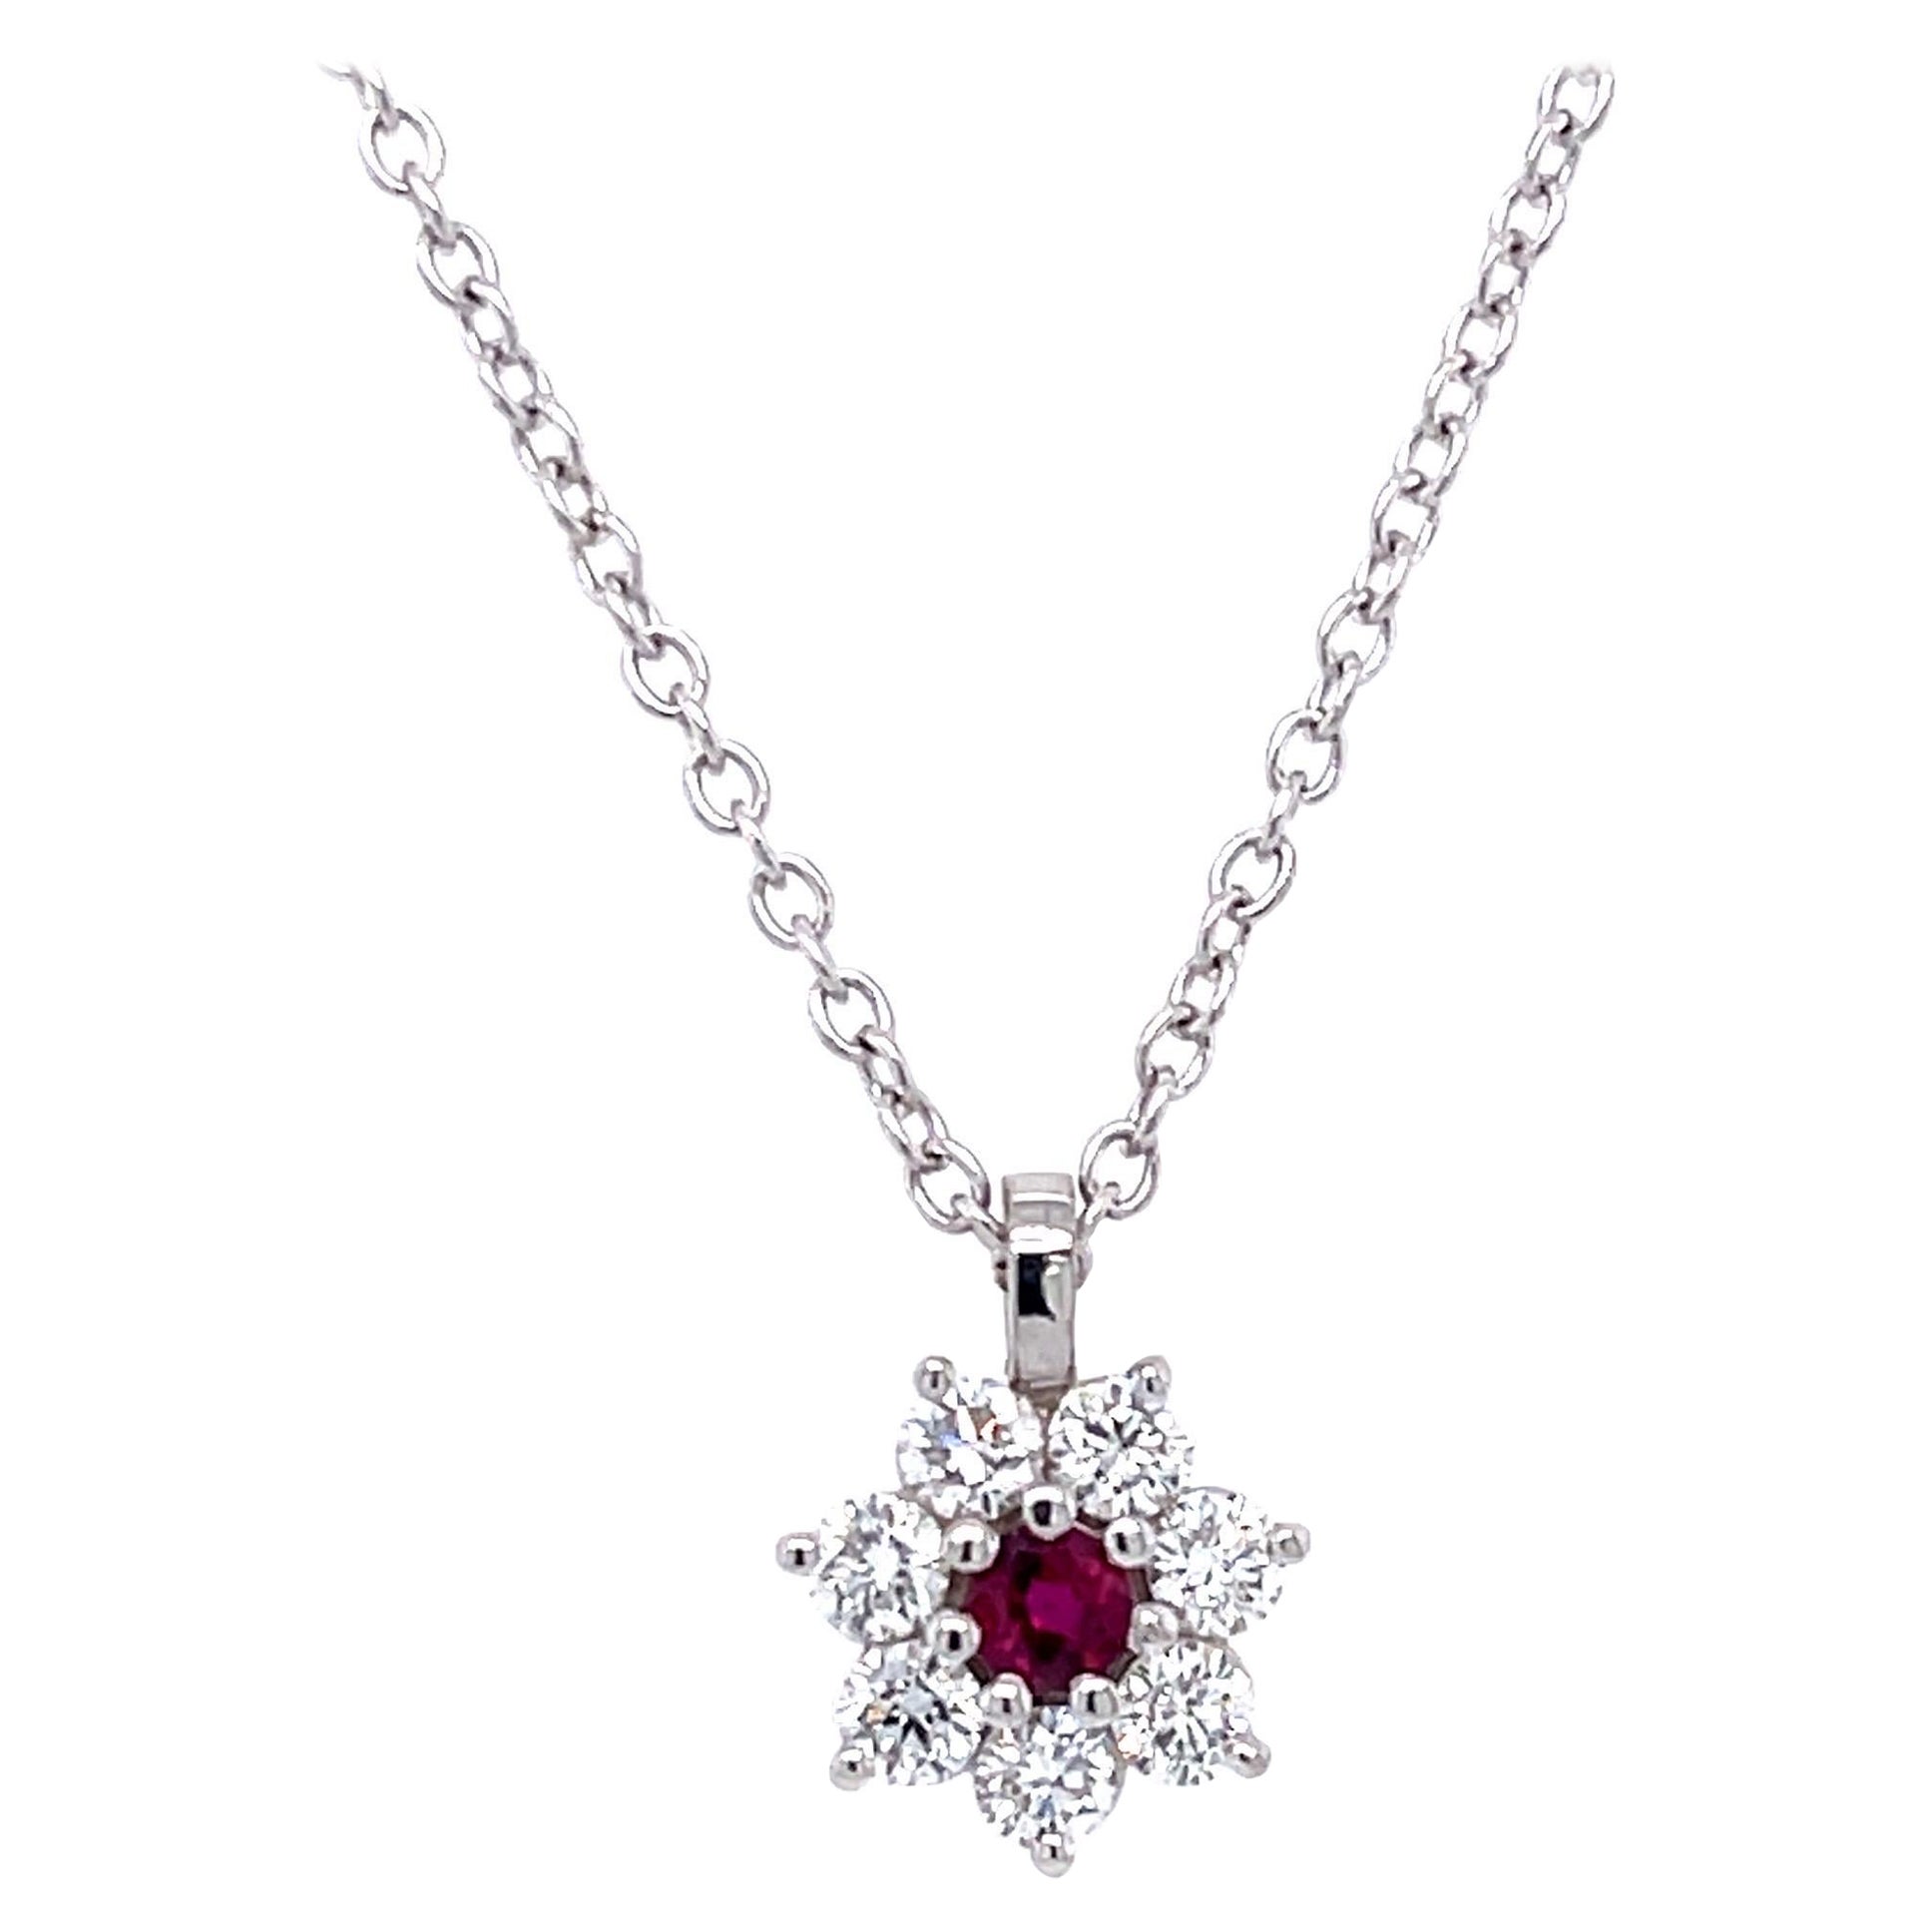 Diamond and Ruby Pendant/Necklace